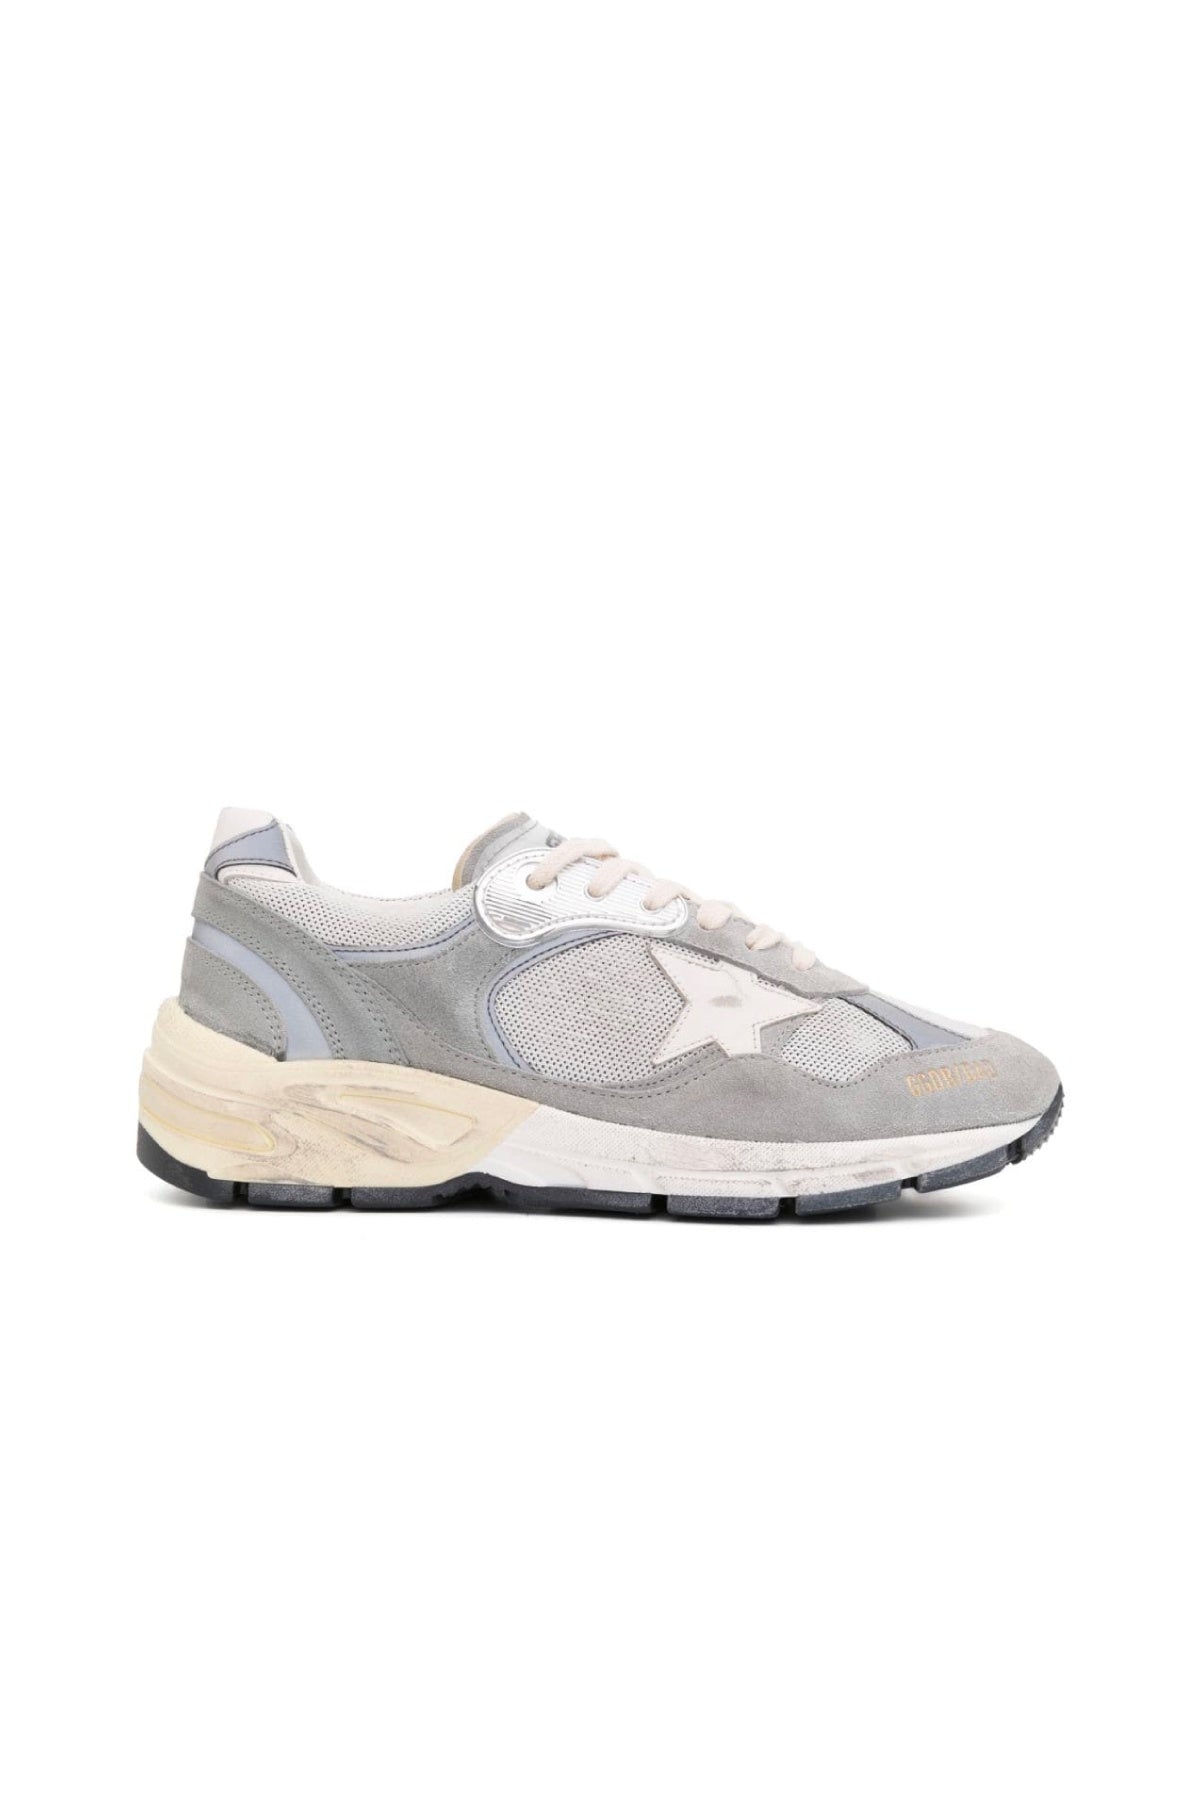 Golden Goose Running Dad Sneakers - Grey/ Silver/ White